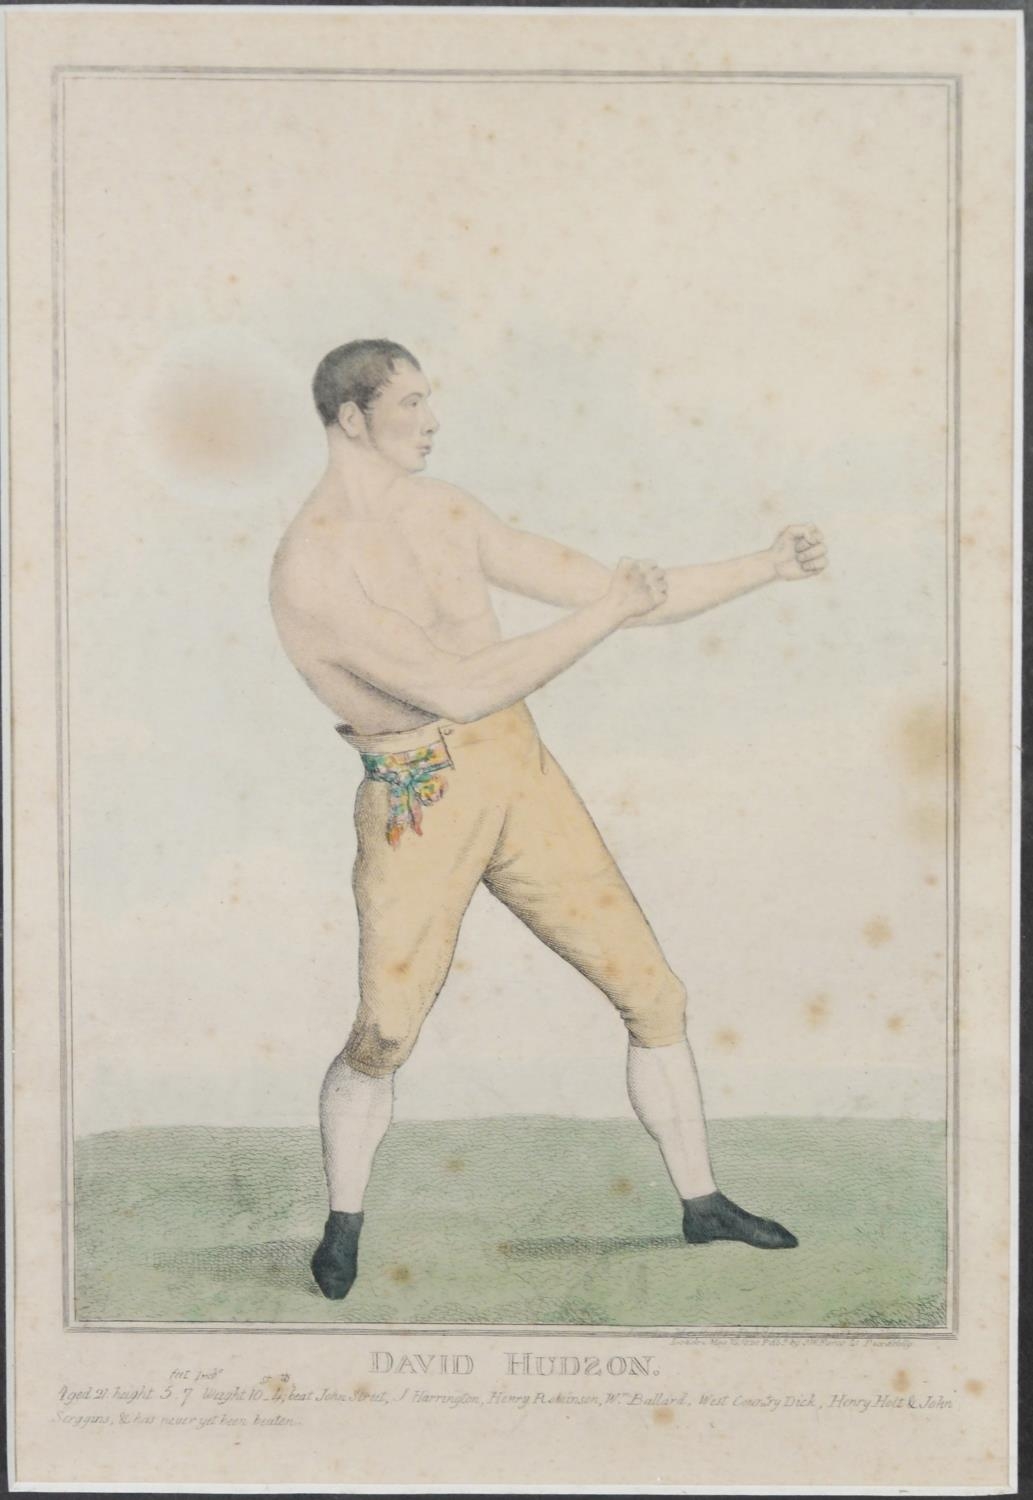 S.W. FORES (Publisher) EARLY 19th CENTURY COLOUR PRINTS OF BARE-KNUCKLE BOXERS David Hindson,